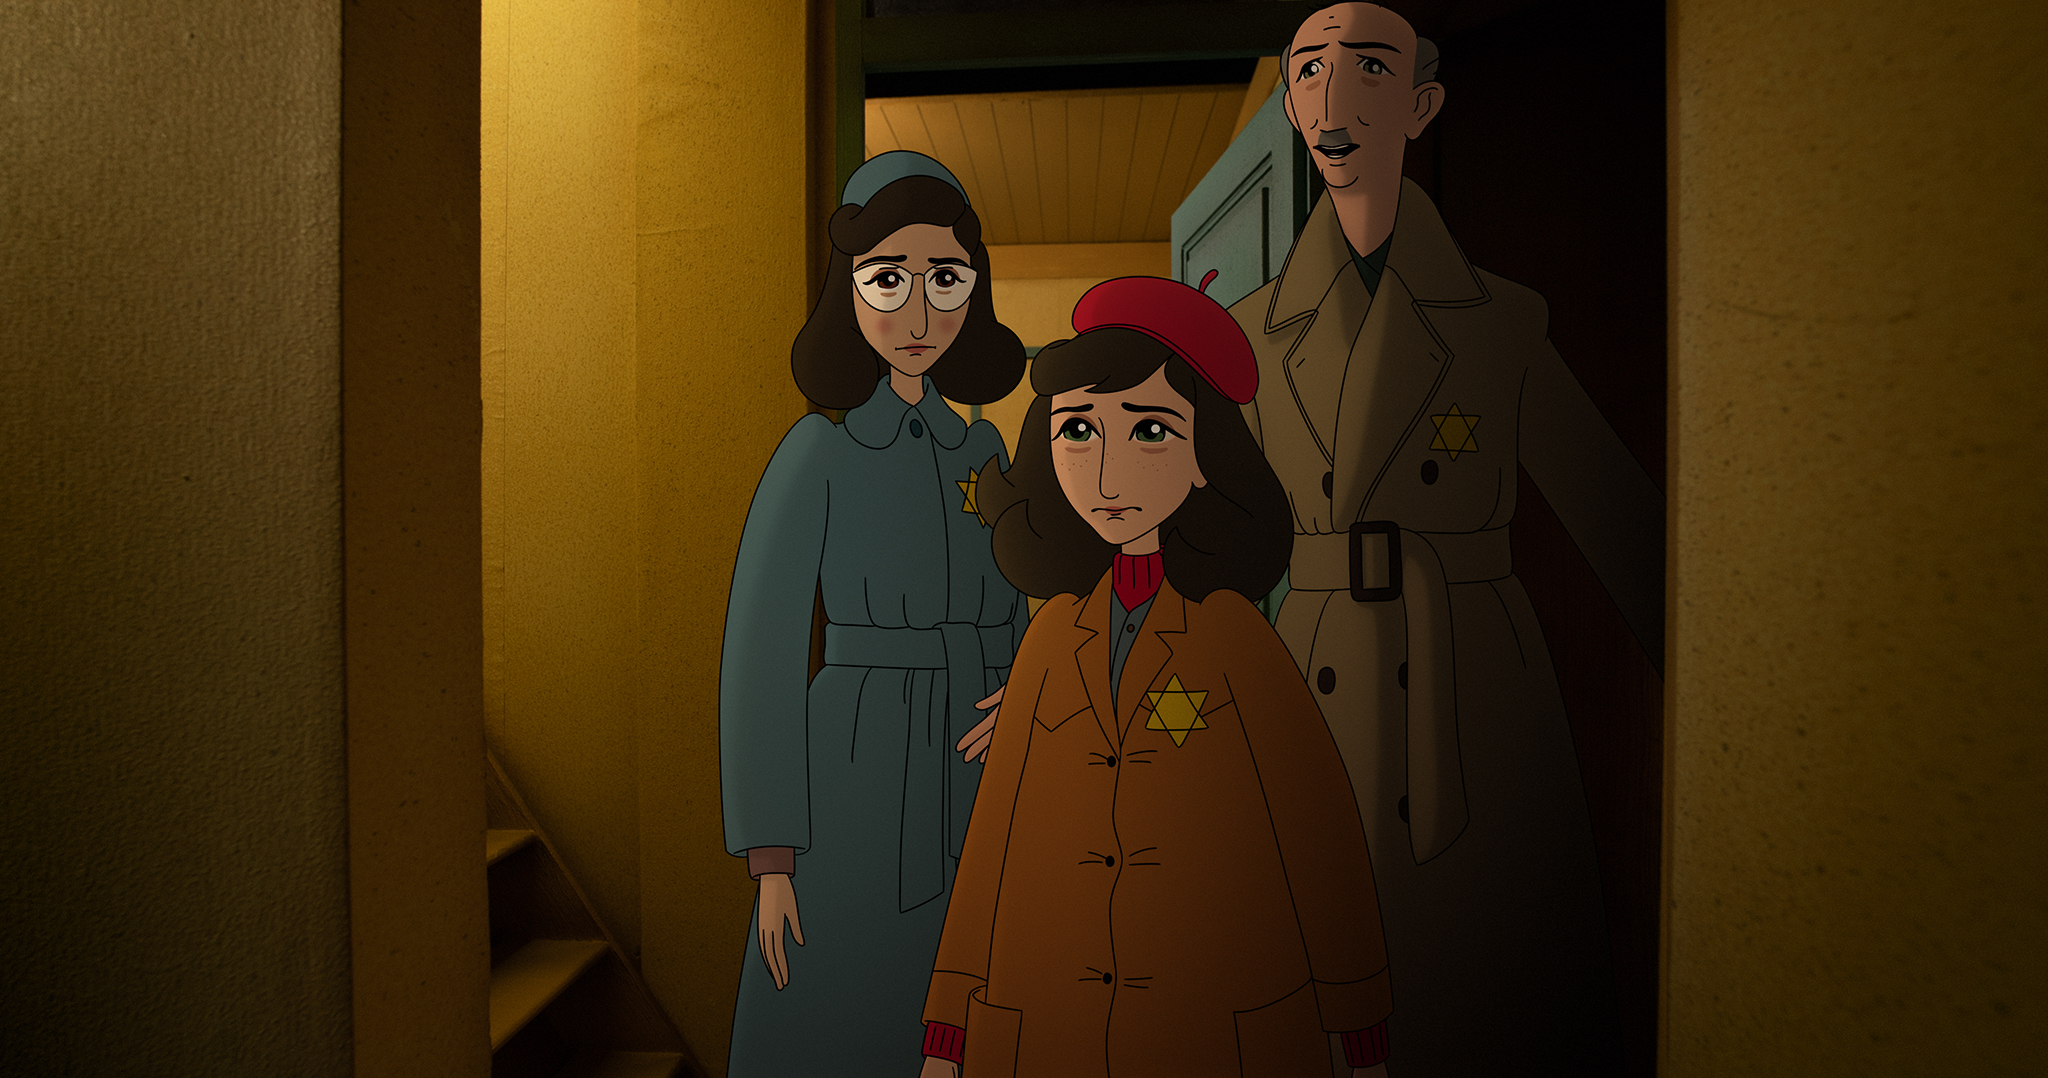 Piercing animated Anne Frank film focuses on the little girl behind the  symbol | The Times of Israel